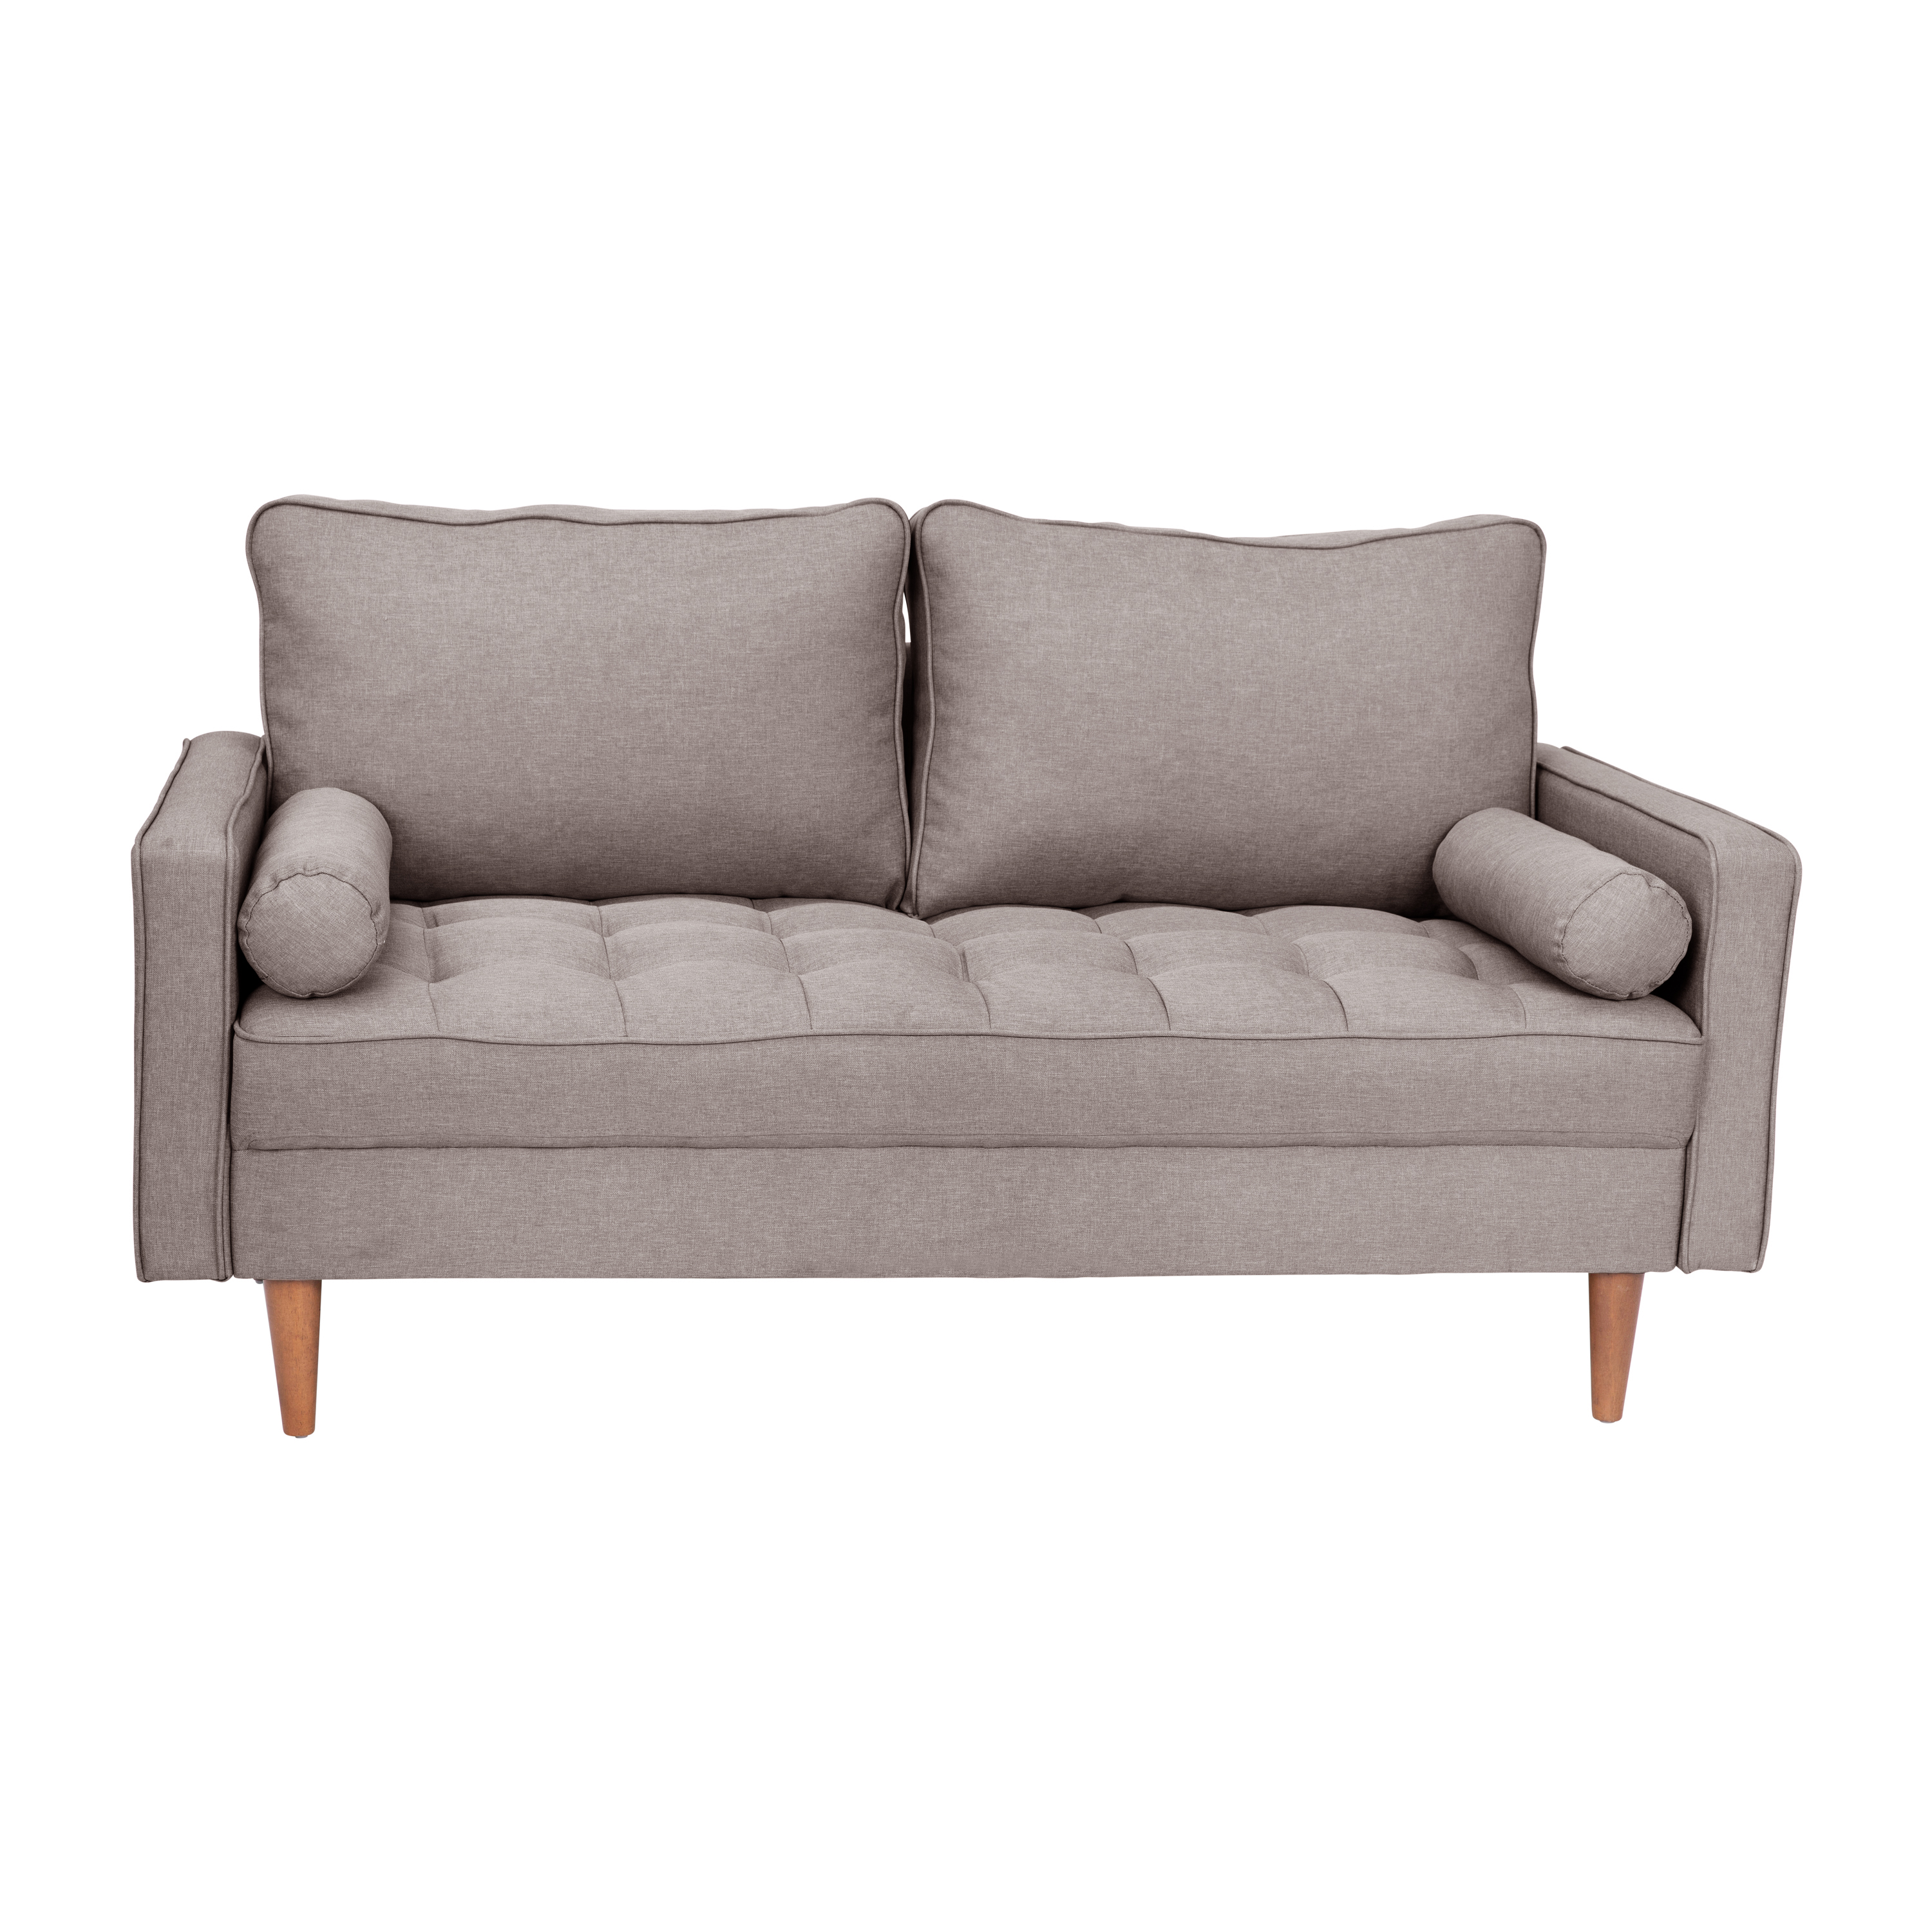 Flash Furniture IS-PL100-GY-GG Mid-Century Modern Slate Gray Tufted Faux Linen Loveseat Sofa with Wood Legs